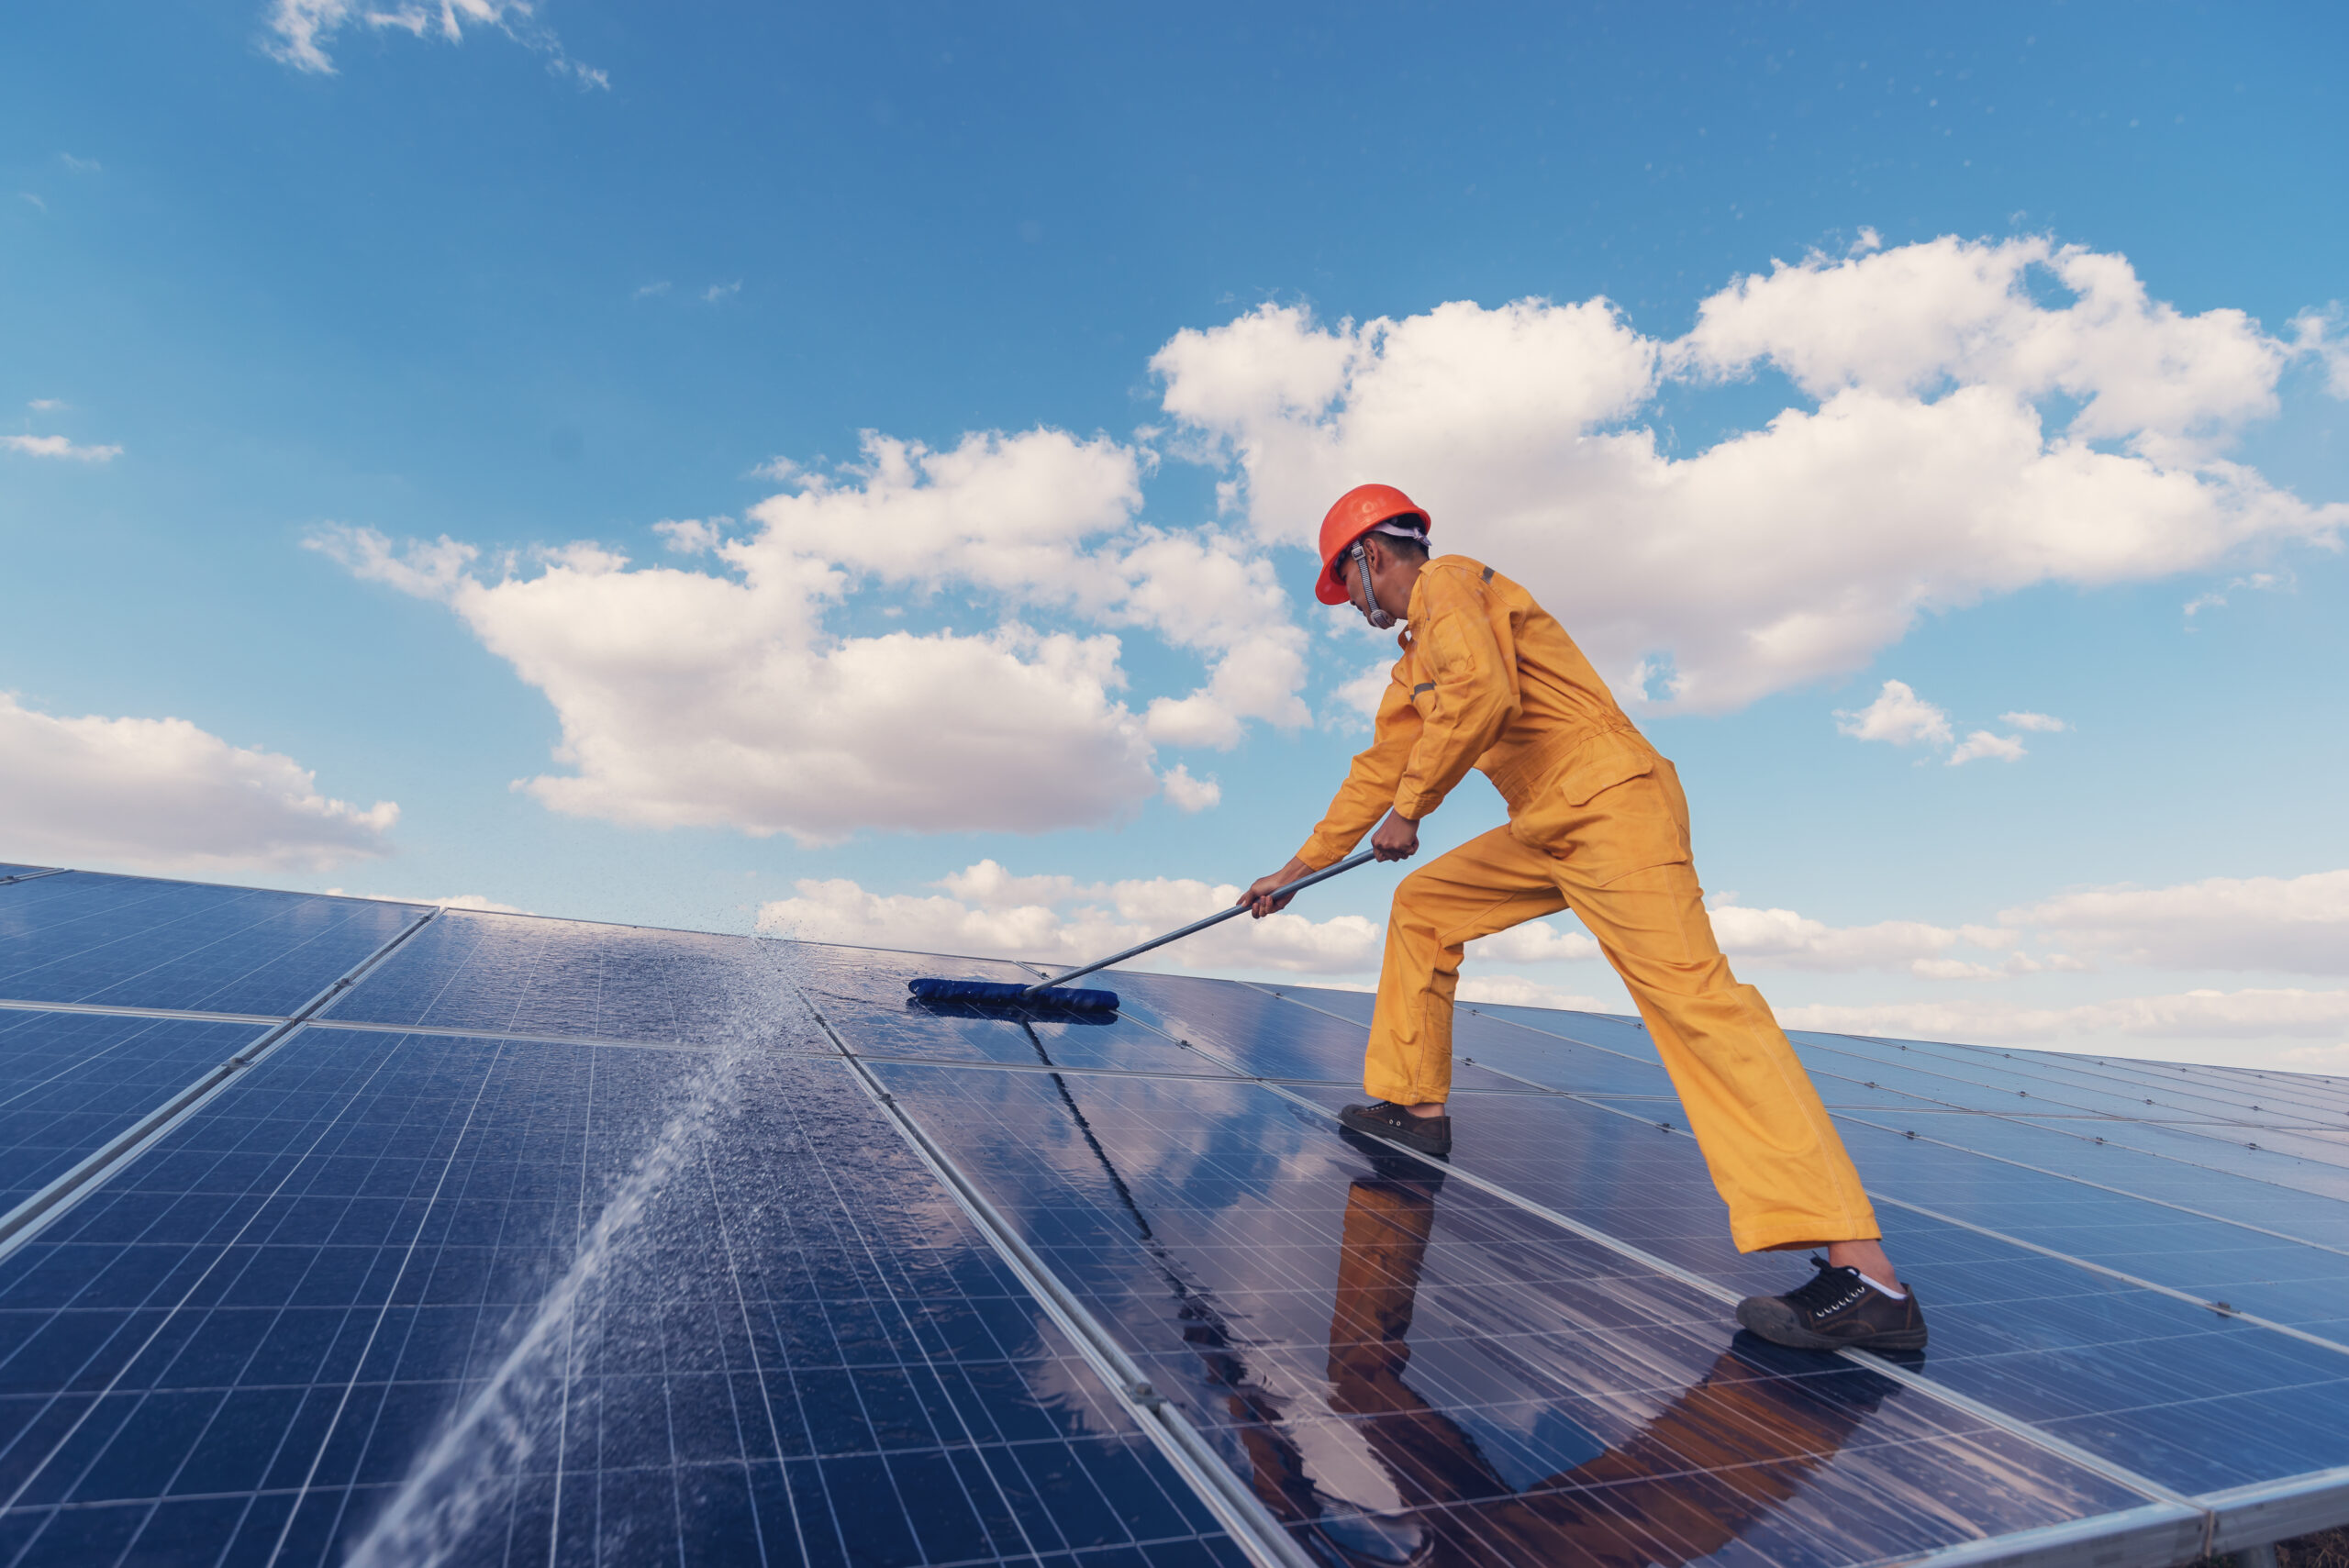 Professional Cleaning Advice: A Step-by-Step Guide on How to Clean Solar Panels